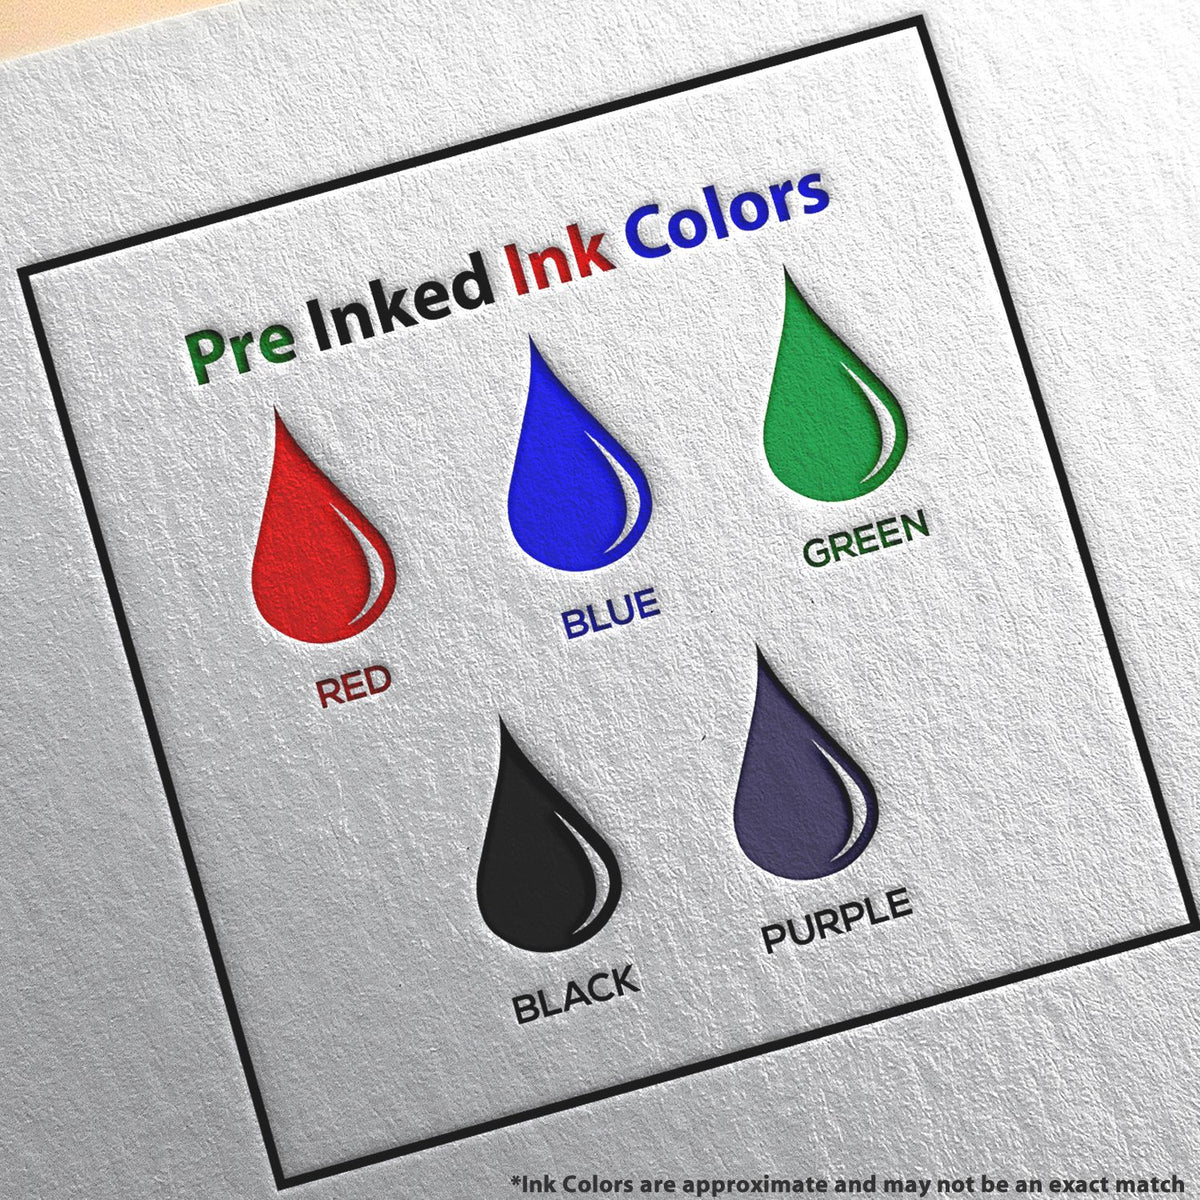 A picture showing the different ink colors or hues available for the Slim Pre-Inked Virginia Professional Engineer Seal Stamp product.